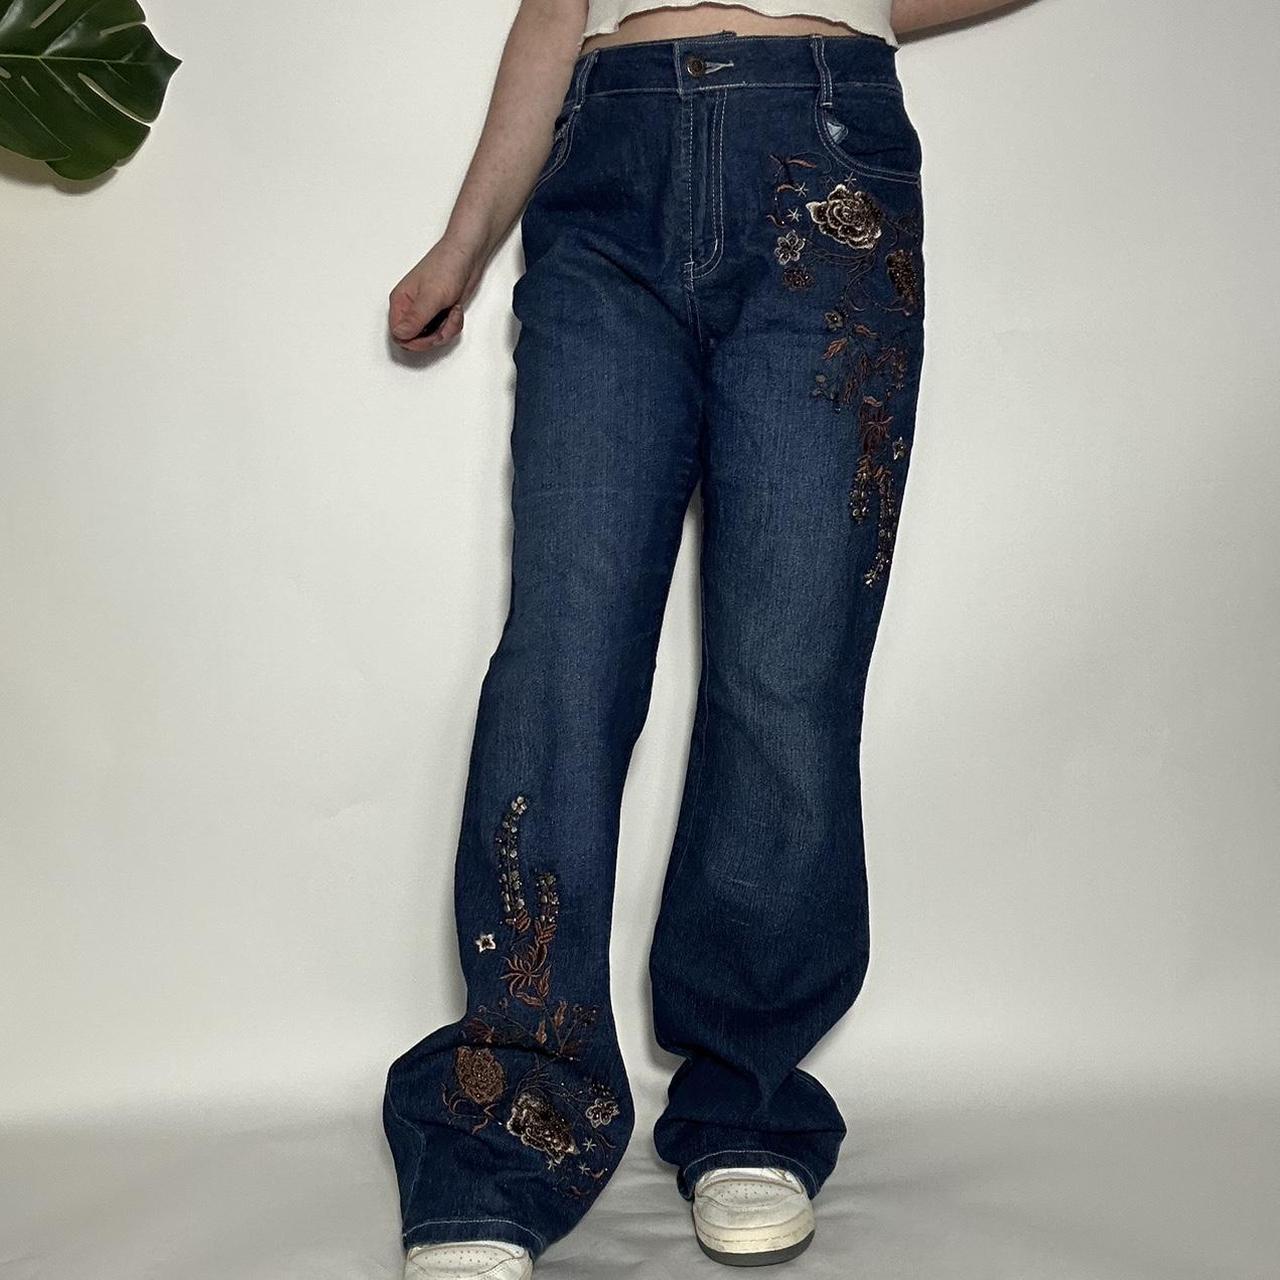 Vintage 90s embroidered floral bootcut jeans